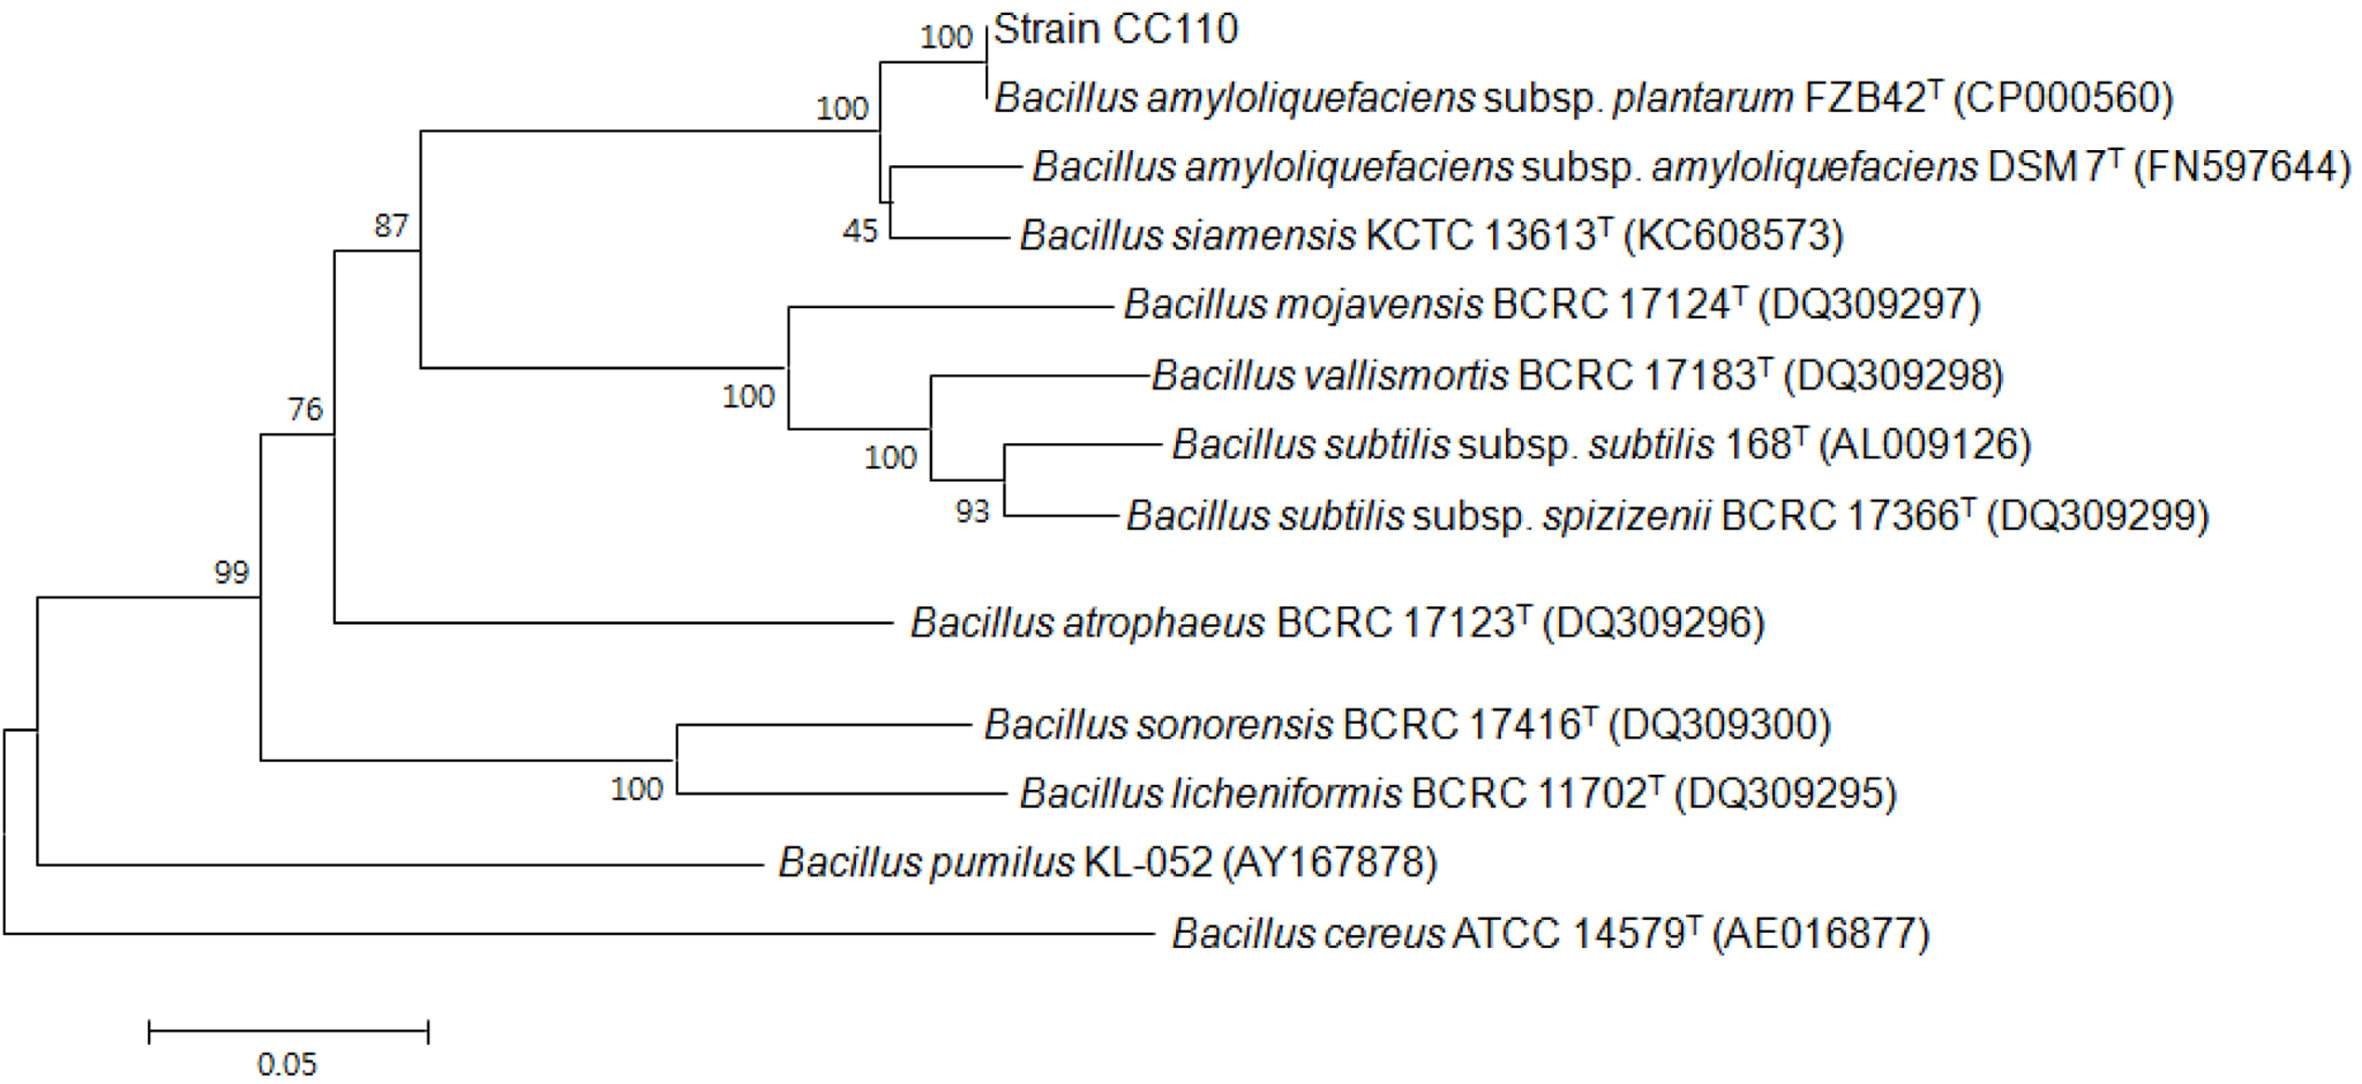 Phylogenetic dendrogram constructed from a comparative analysis of gyrB gene sequence showing the relationships between strain CC110 and related Bacillus species.